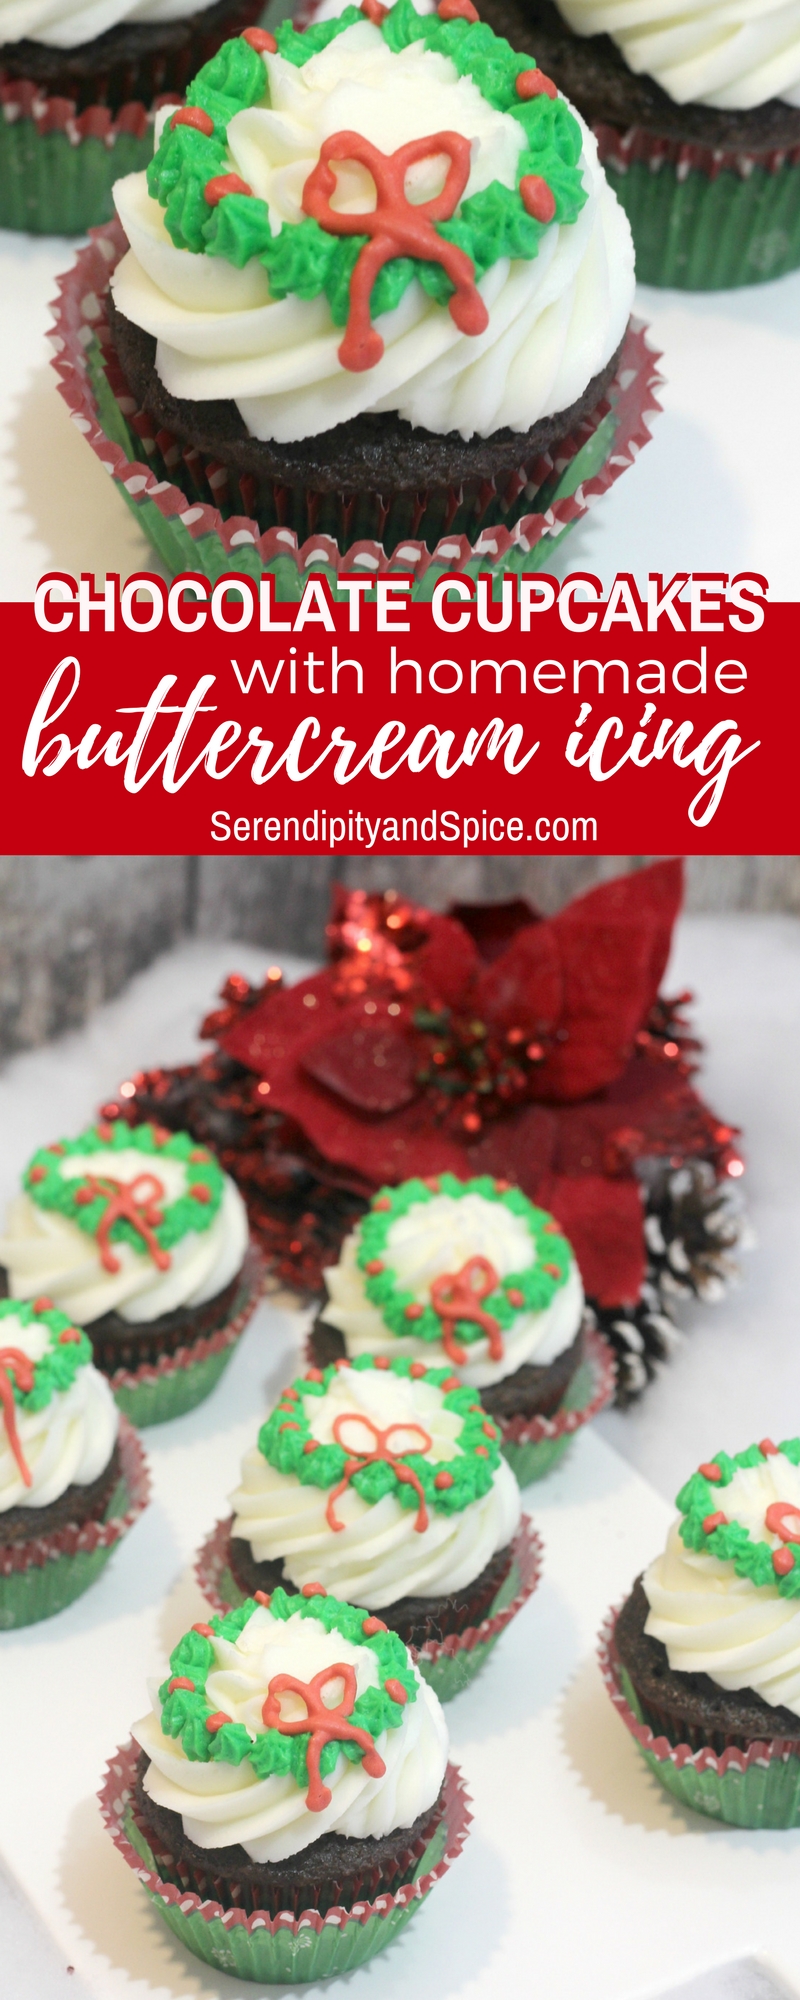 cupcakes Holly Wreath Christmas Cupcakes Recipe These Holly Wreath Christmas Cupcakes are the perfect dessert for your holiday meals!  Make these in the kitchen with the kids!